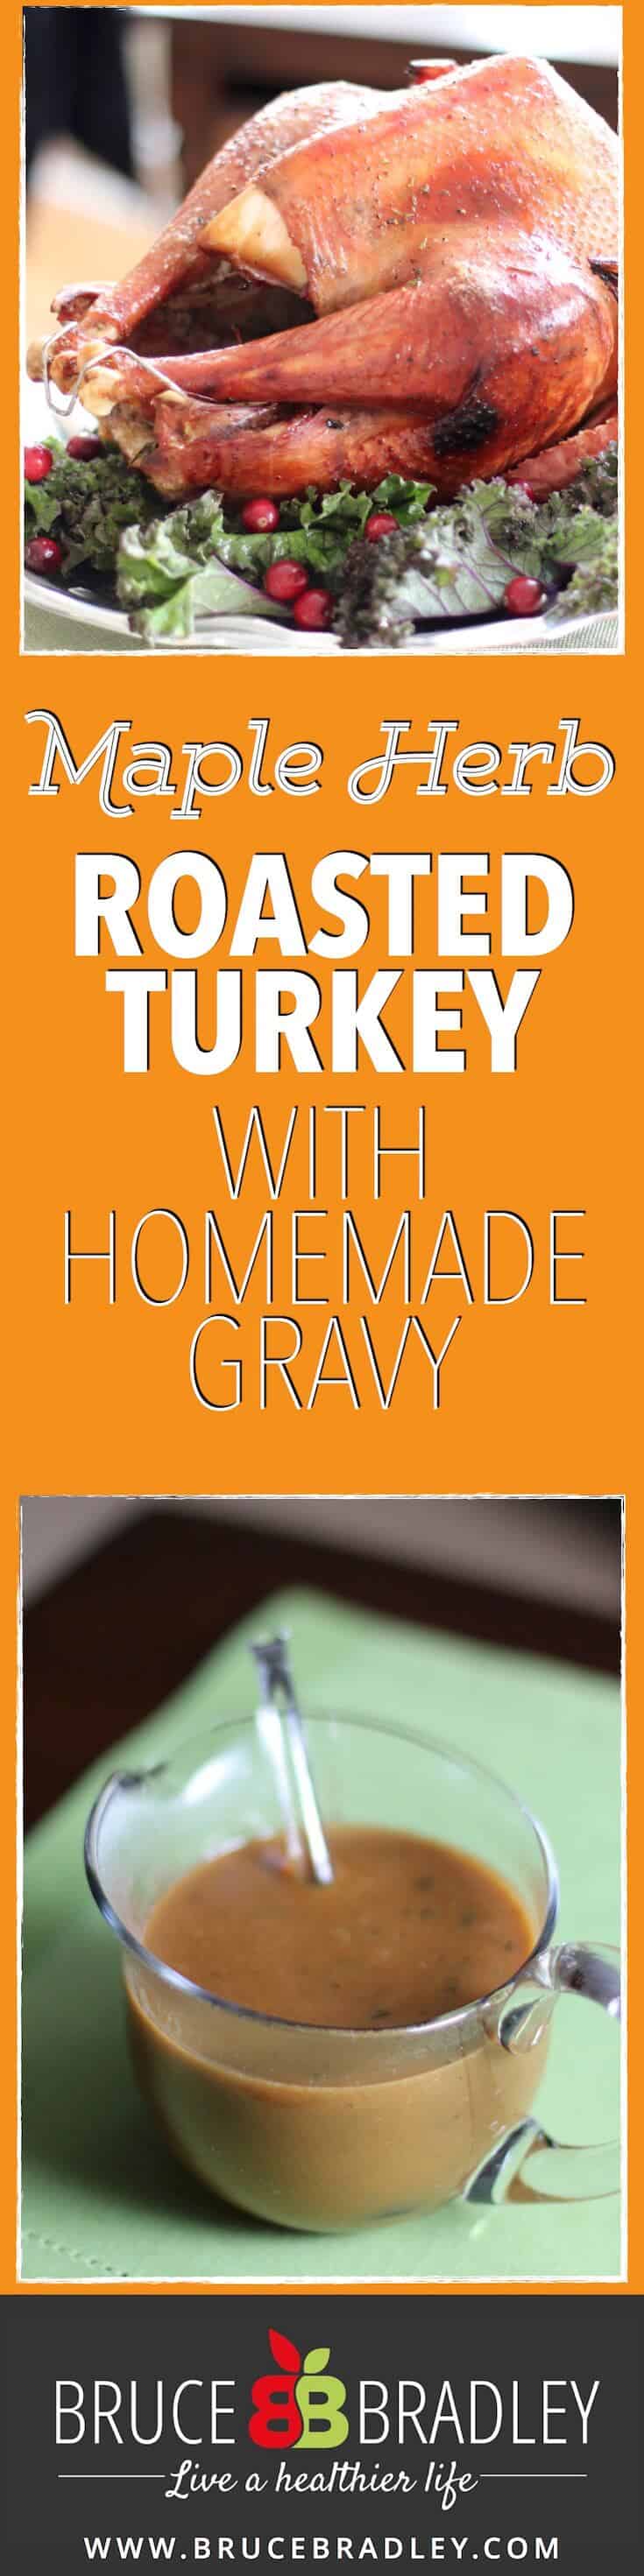 In Let'S Talk Turkey Bruce Bradley Shares How To Find A Healthier Turkey Plus Two Great Recipes On How To Cook A Perfect Maple Herb Roasted Turkey And An Easy, Homemade Gravy That Doesn'T Have To Cause A Last Minute Panic!